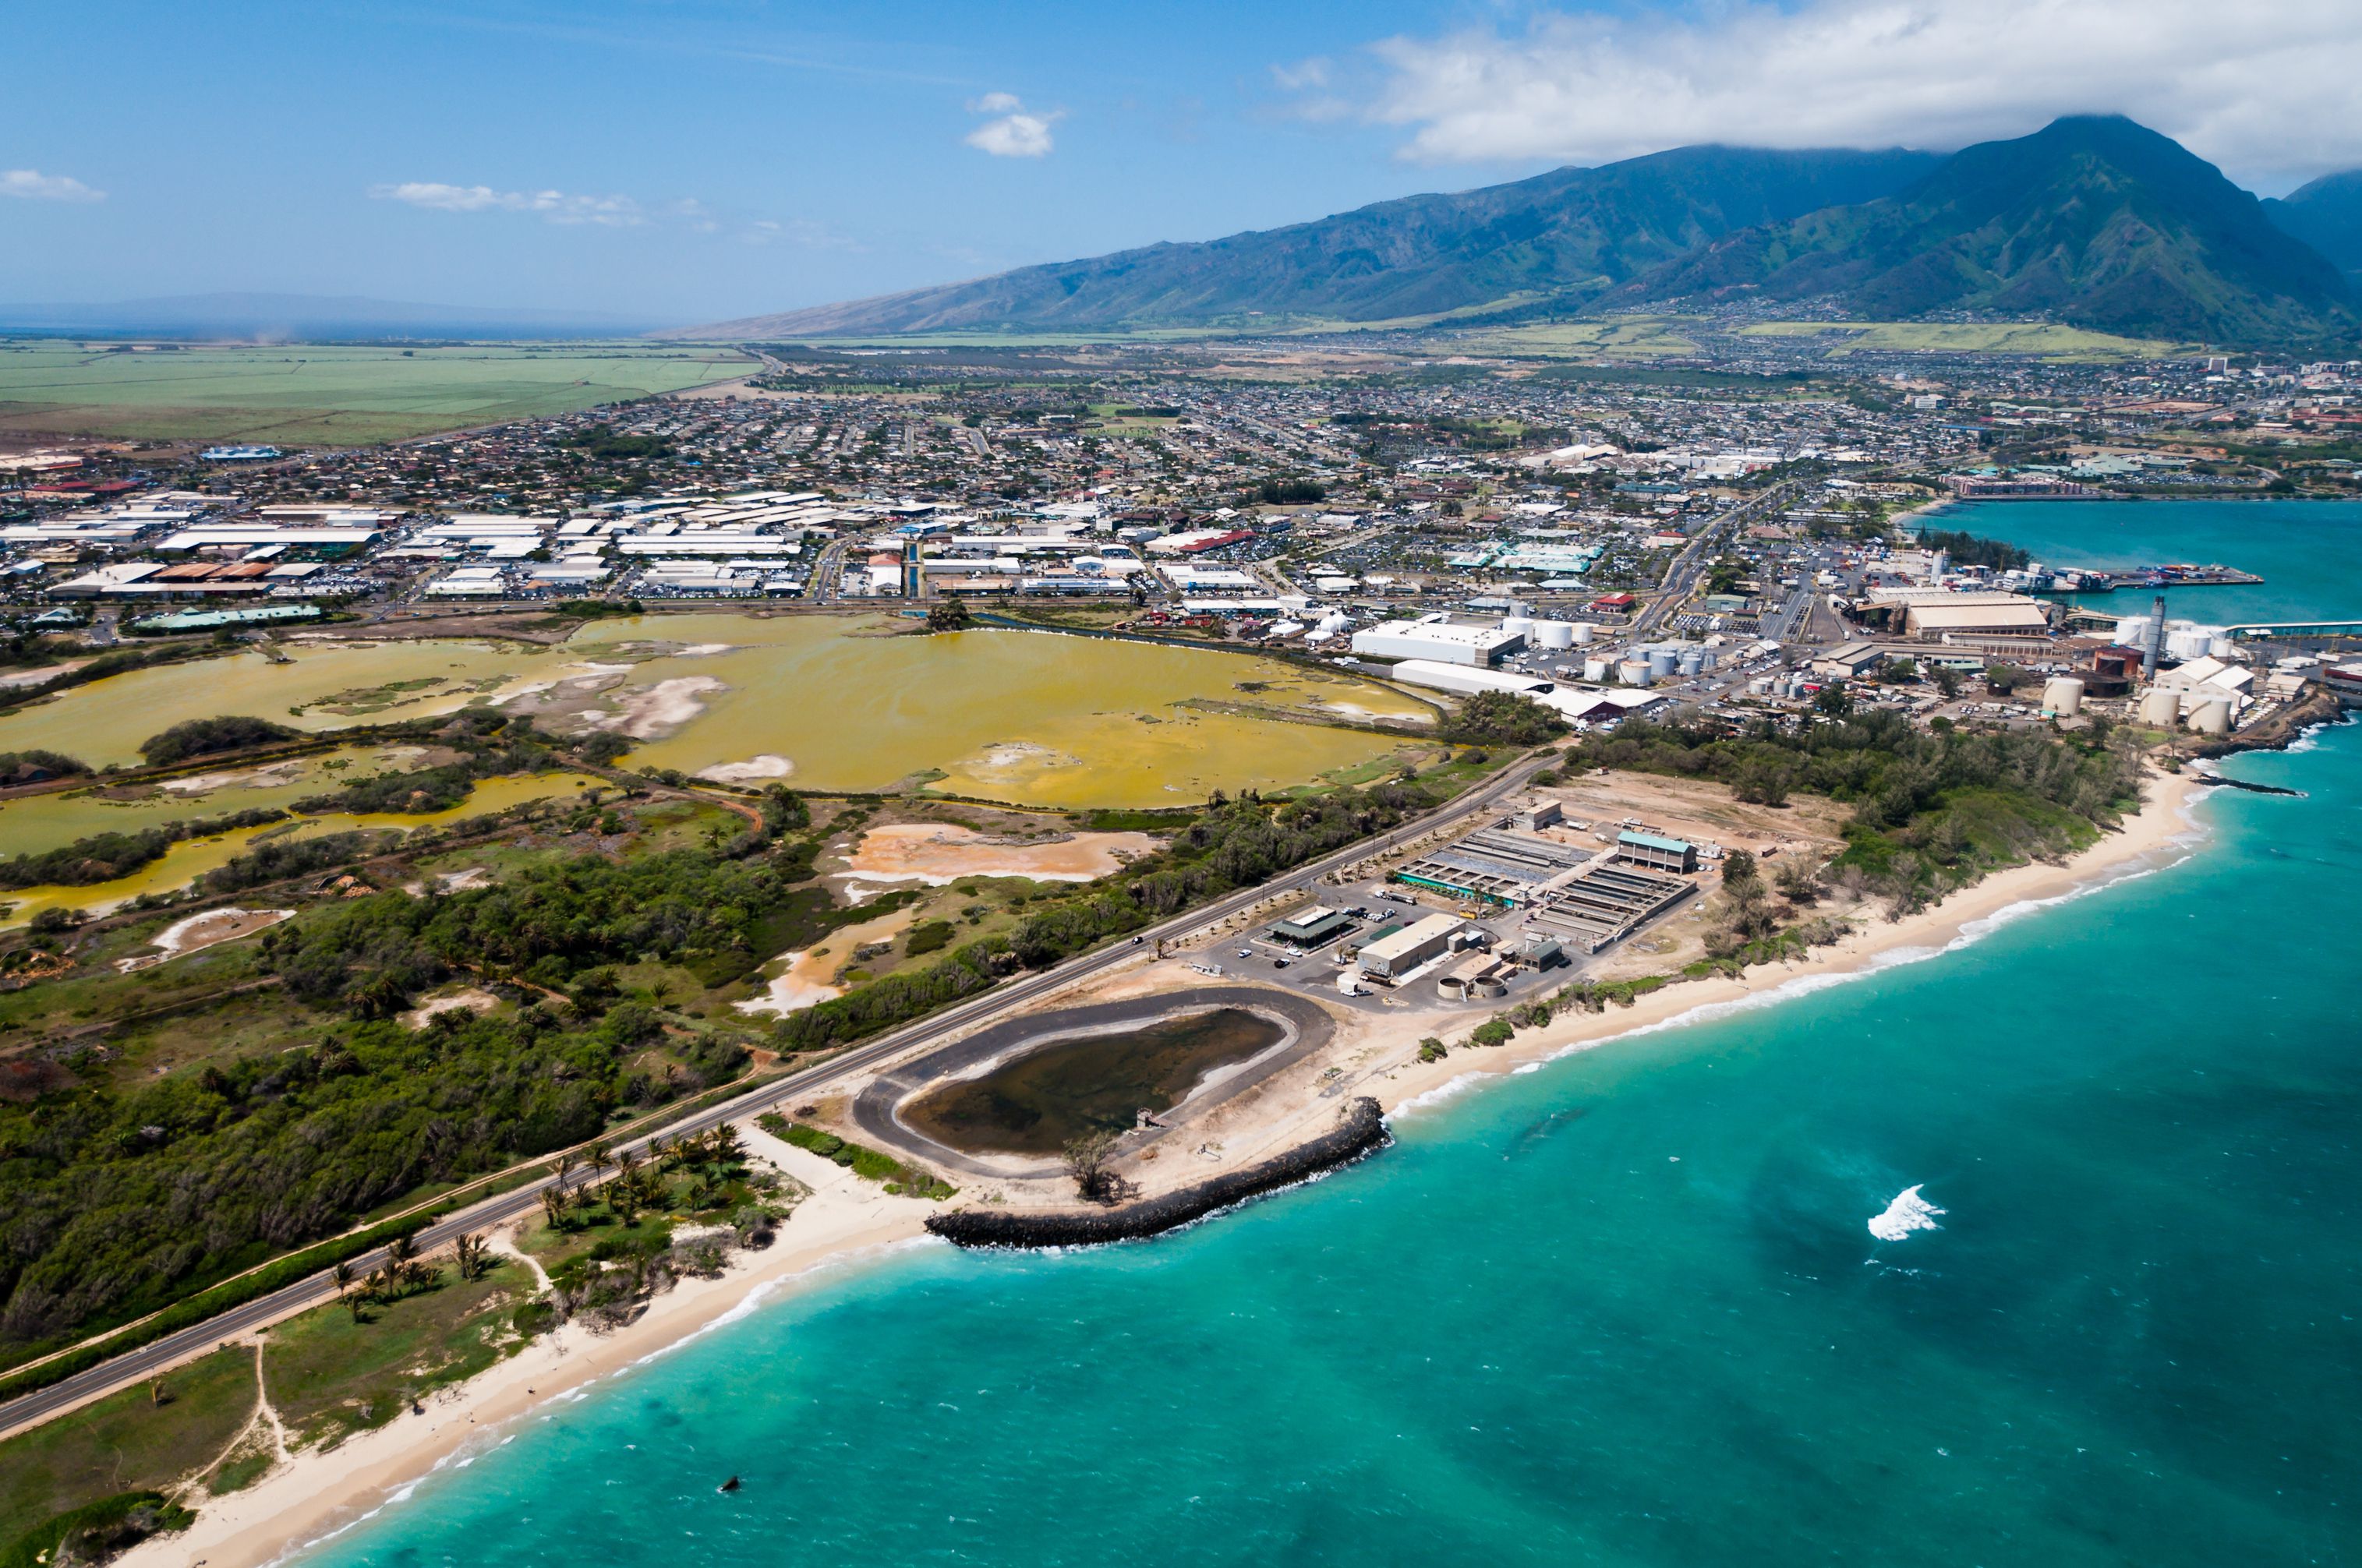 <p><b>Score: </b>19.31</p><p>Again, "worst" is a bit of a misnomer. It means Kahului's airport is third least likely to have long delays or layovers. However, because these Hawaiian airports rarely experience delays and are small, there are fewer available activities or reasonably-priced last minute hotel accommodations. Kahului ranks 124th place for airport affordability.</p>